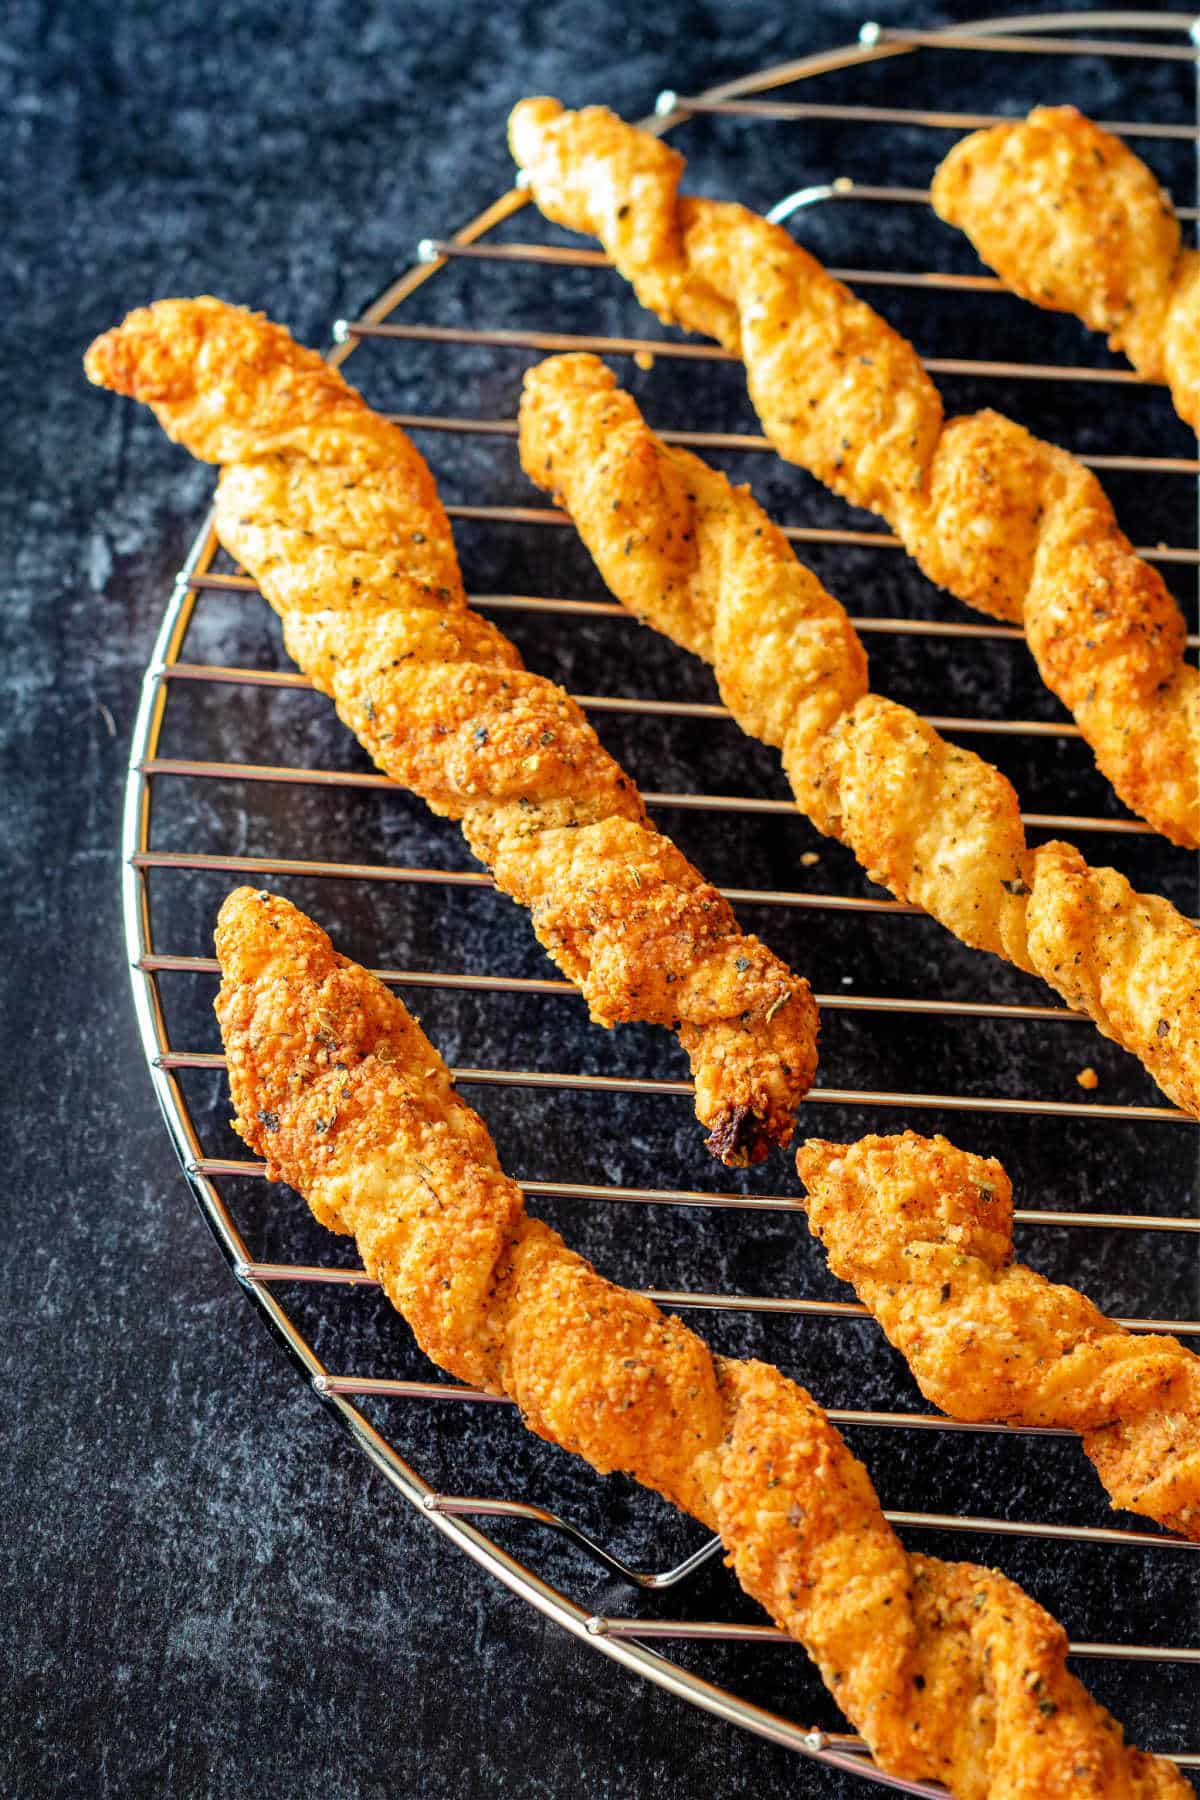 Puff pastry cheese straws cooling on a rack on a black surface.